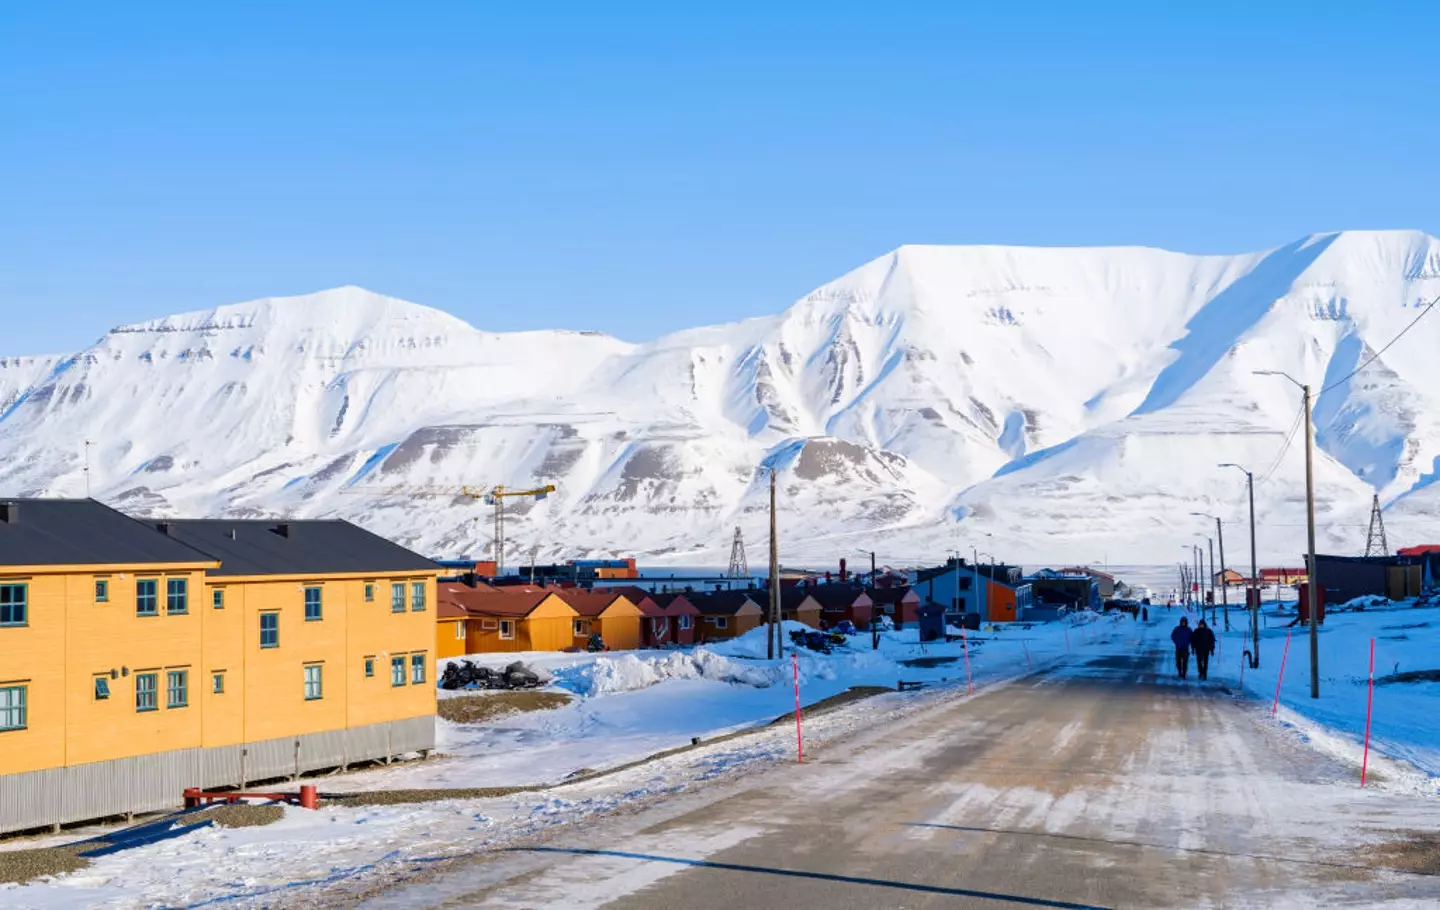 It's been mistakenly reported that you cannot die in Longyearbyen, however, that's not the case (Martin Zwick/REDA&CO/Universal Images Group via Getty Images)